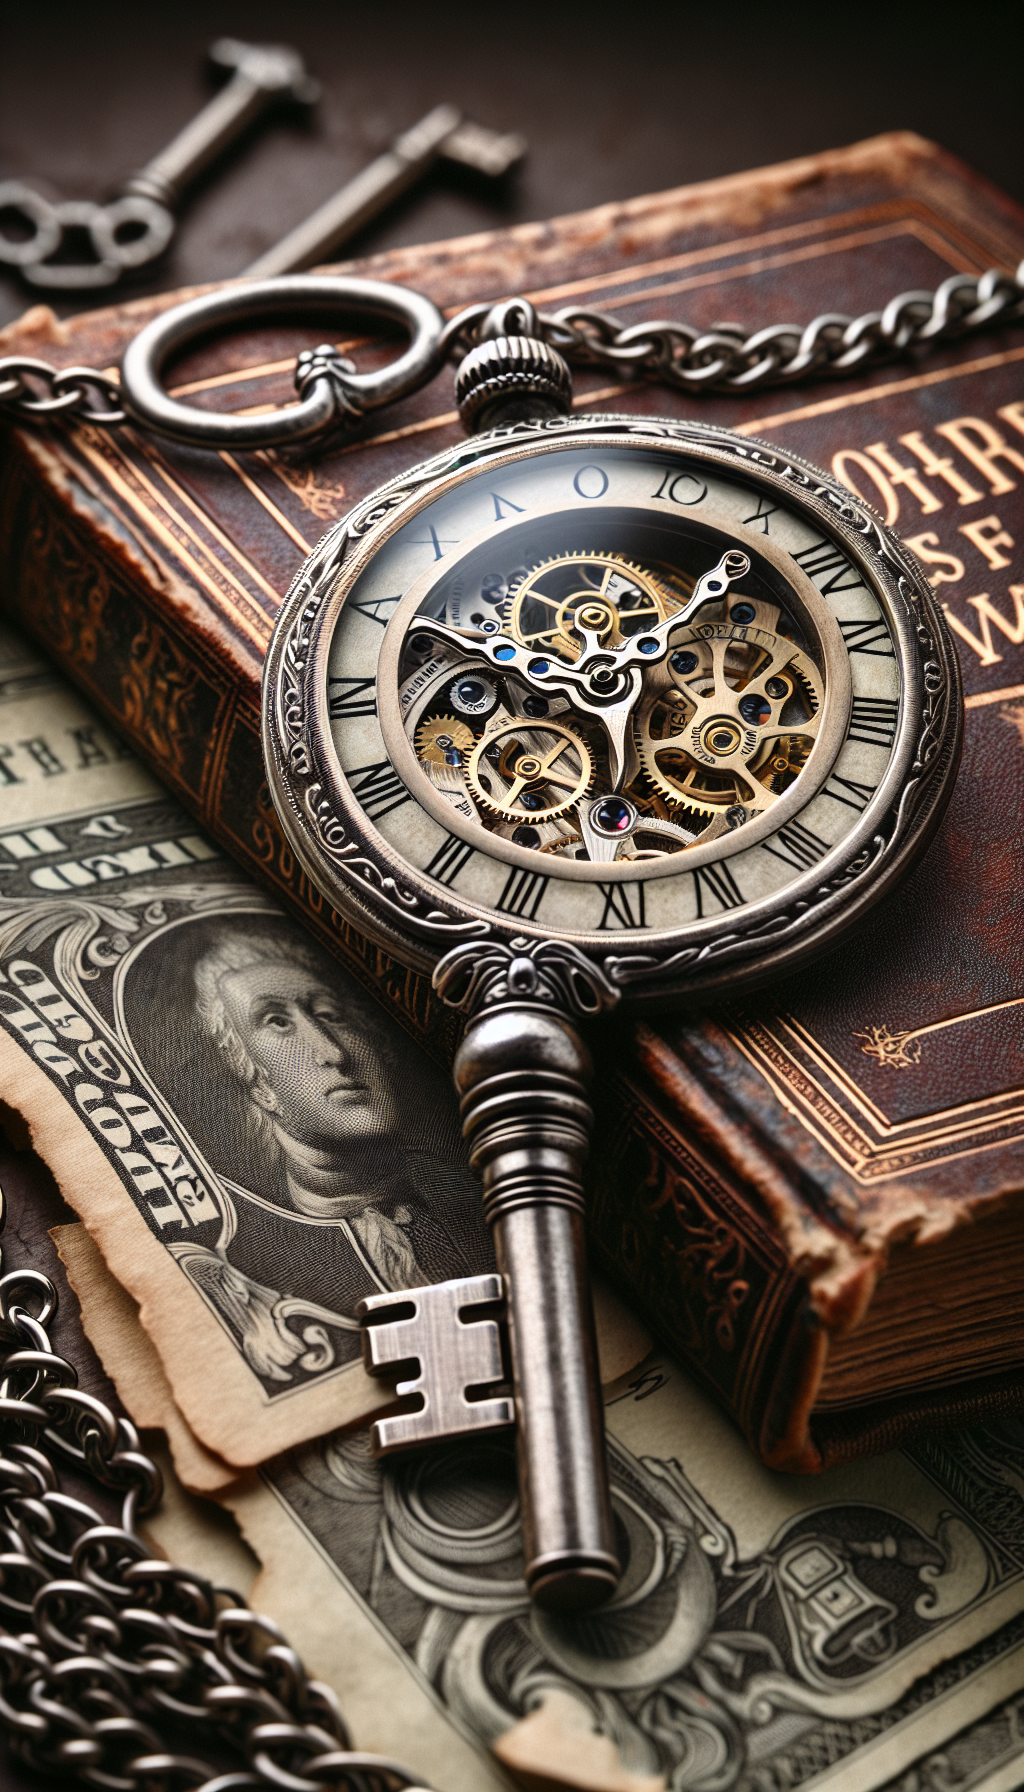 An antiquated, ornate key morphs seamlessly into an elegant Croton watch chain, its head framing a vintage Croton watch face. Intricate gears visible behind the Roman numerals suggest a passage through time. The key-watch hangs over a dusty tome titled "Croton Chronicles," with the book's pages subtly imprinted with coin stacks, hinting at the watch's enduring value.